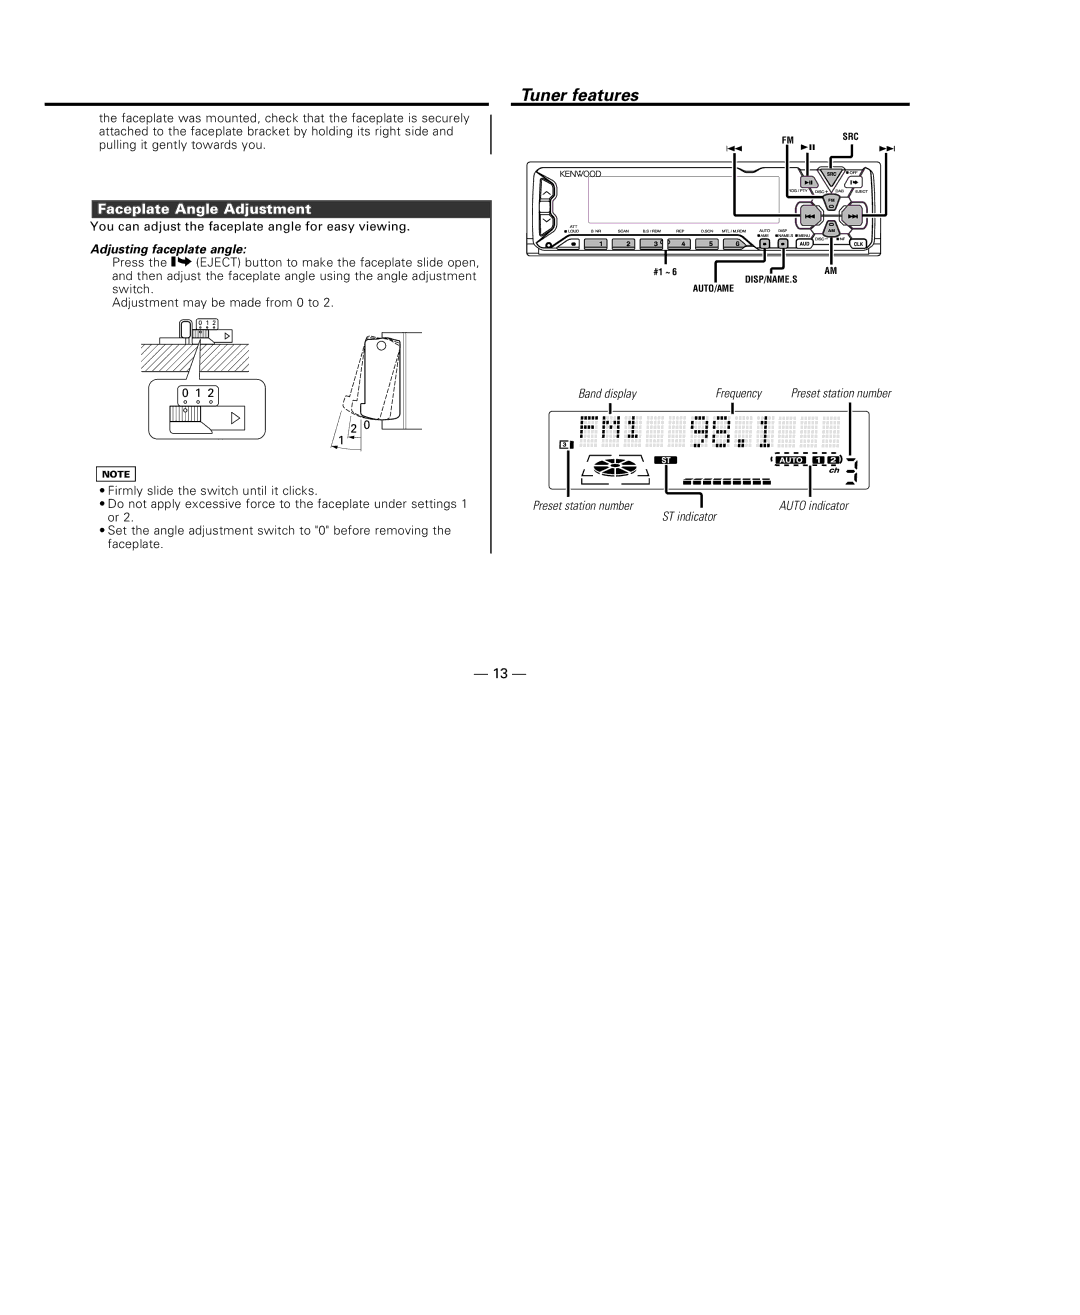 Kenwood KRC-708, KRC-X858 instruction manual Tuner features, Faceplate Angle Adjustment, Adjusting faceplate angle 